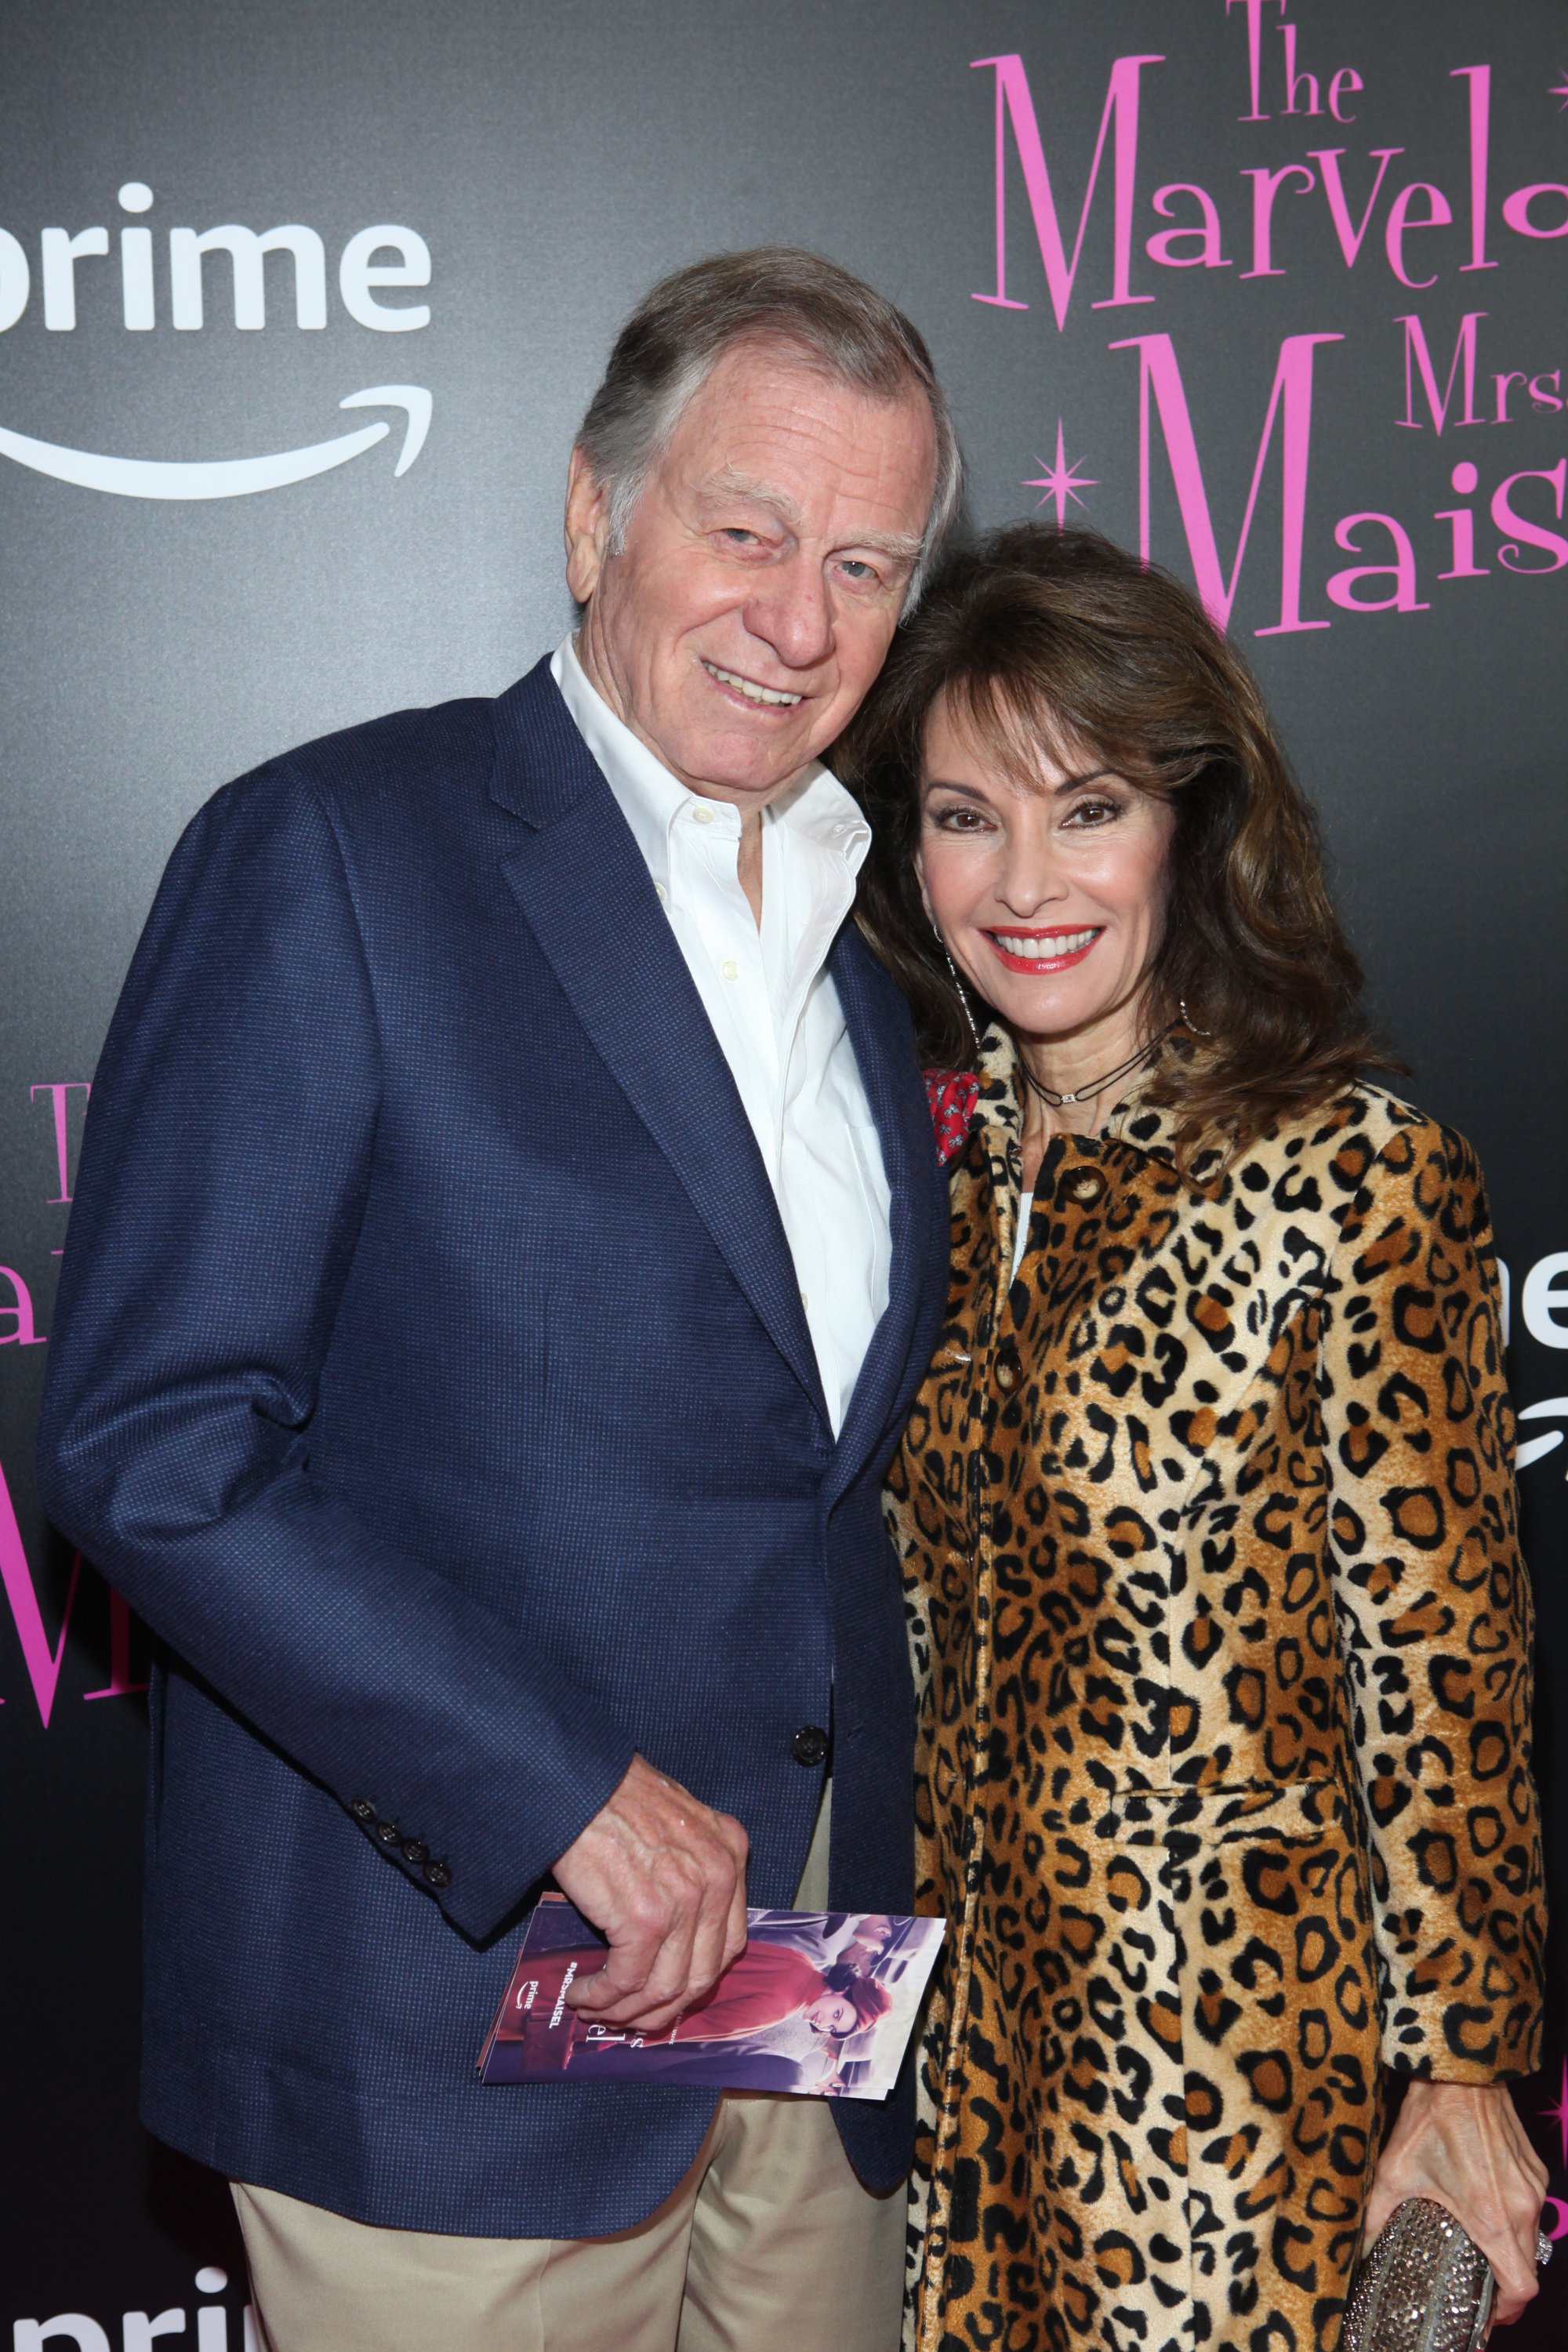 Helmut Huber and Susan Lucci attend "The Marvelous Mrs. Maisel" New York Premiere at Village East Cinema on November 13, 2017, in New York City. | Source: Getty Images